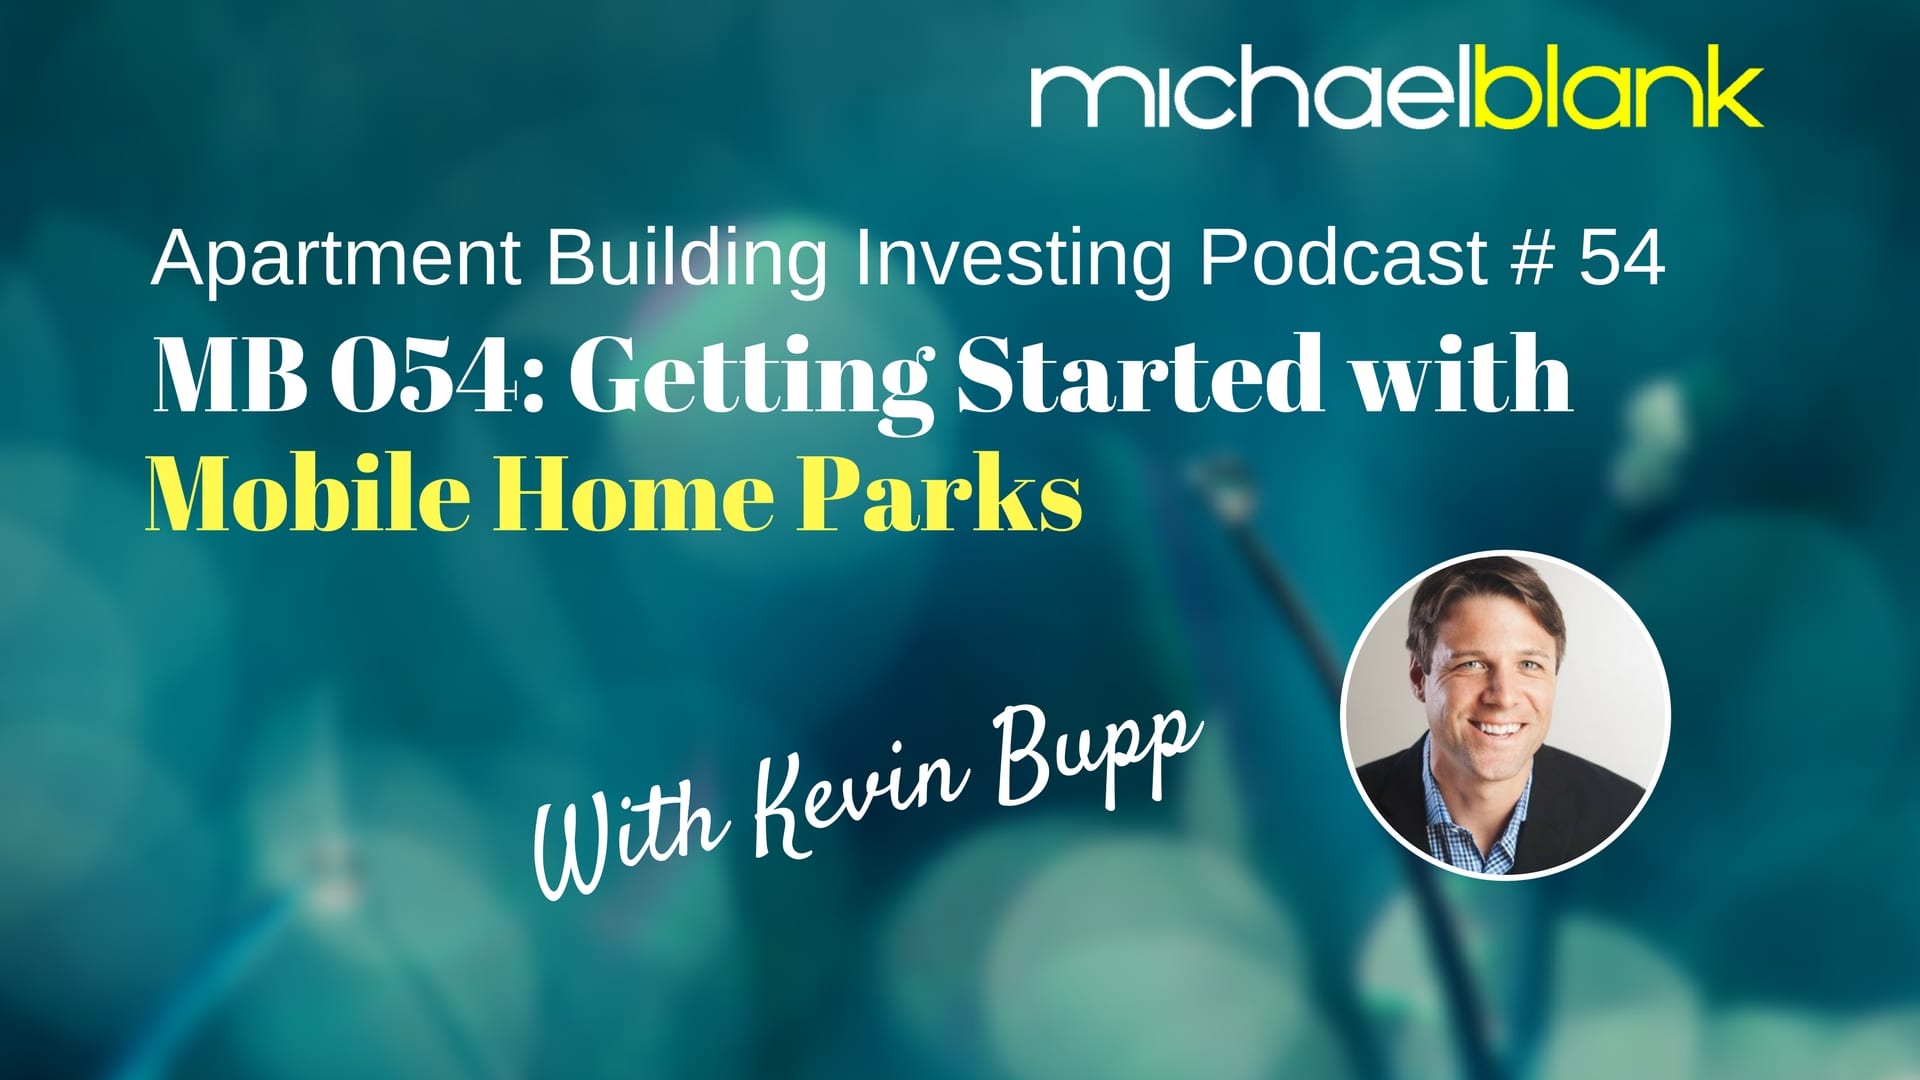 MB 054: Getting Started with Mobile Home Parks – With Kevin Bupp